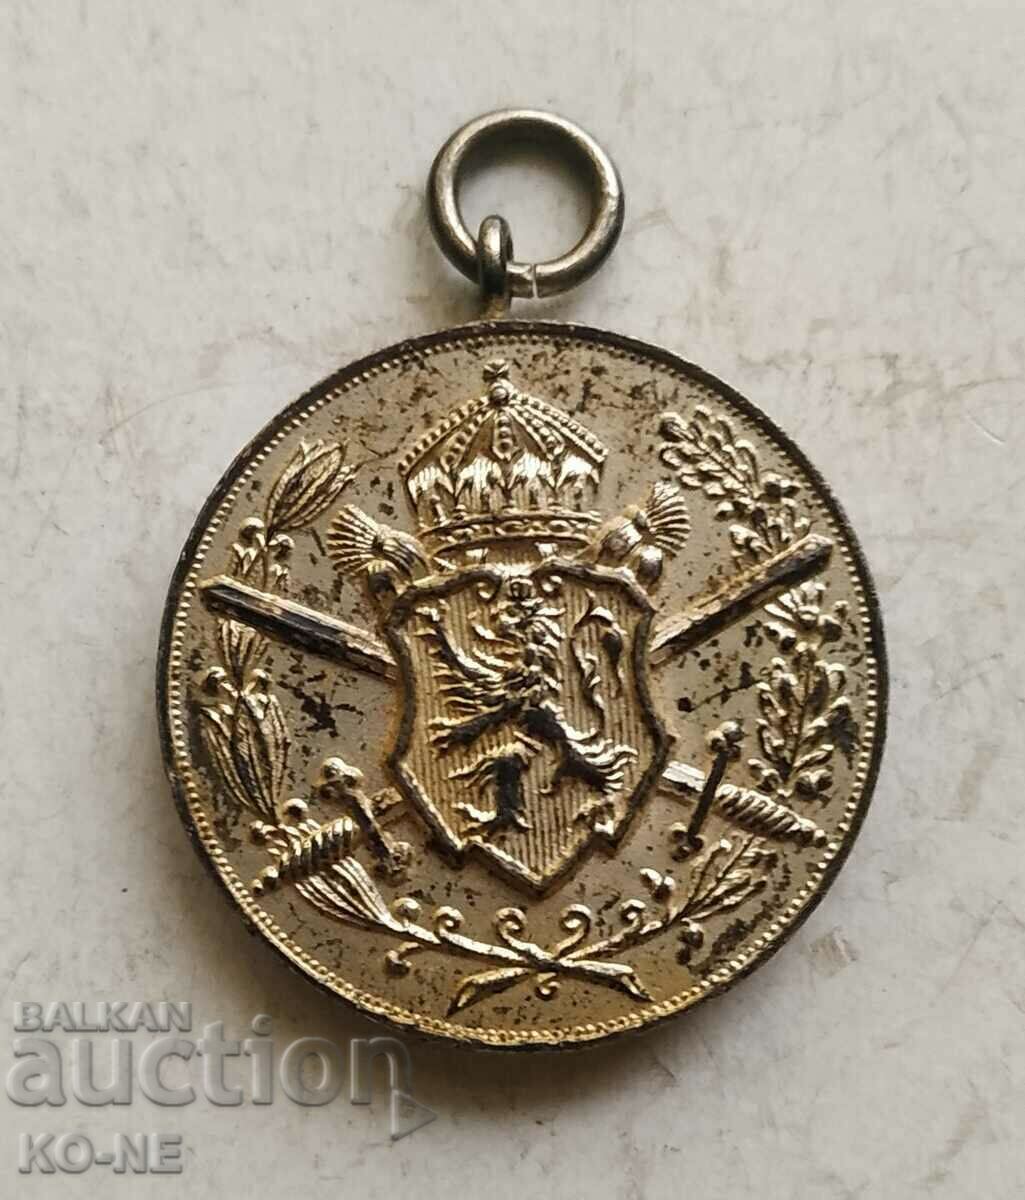 Medal for participation in the Balkan War 1912-13